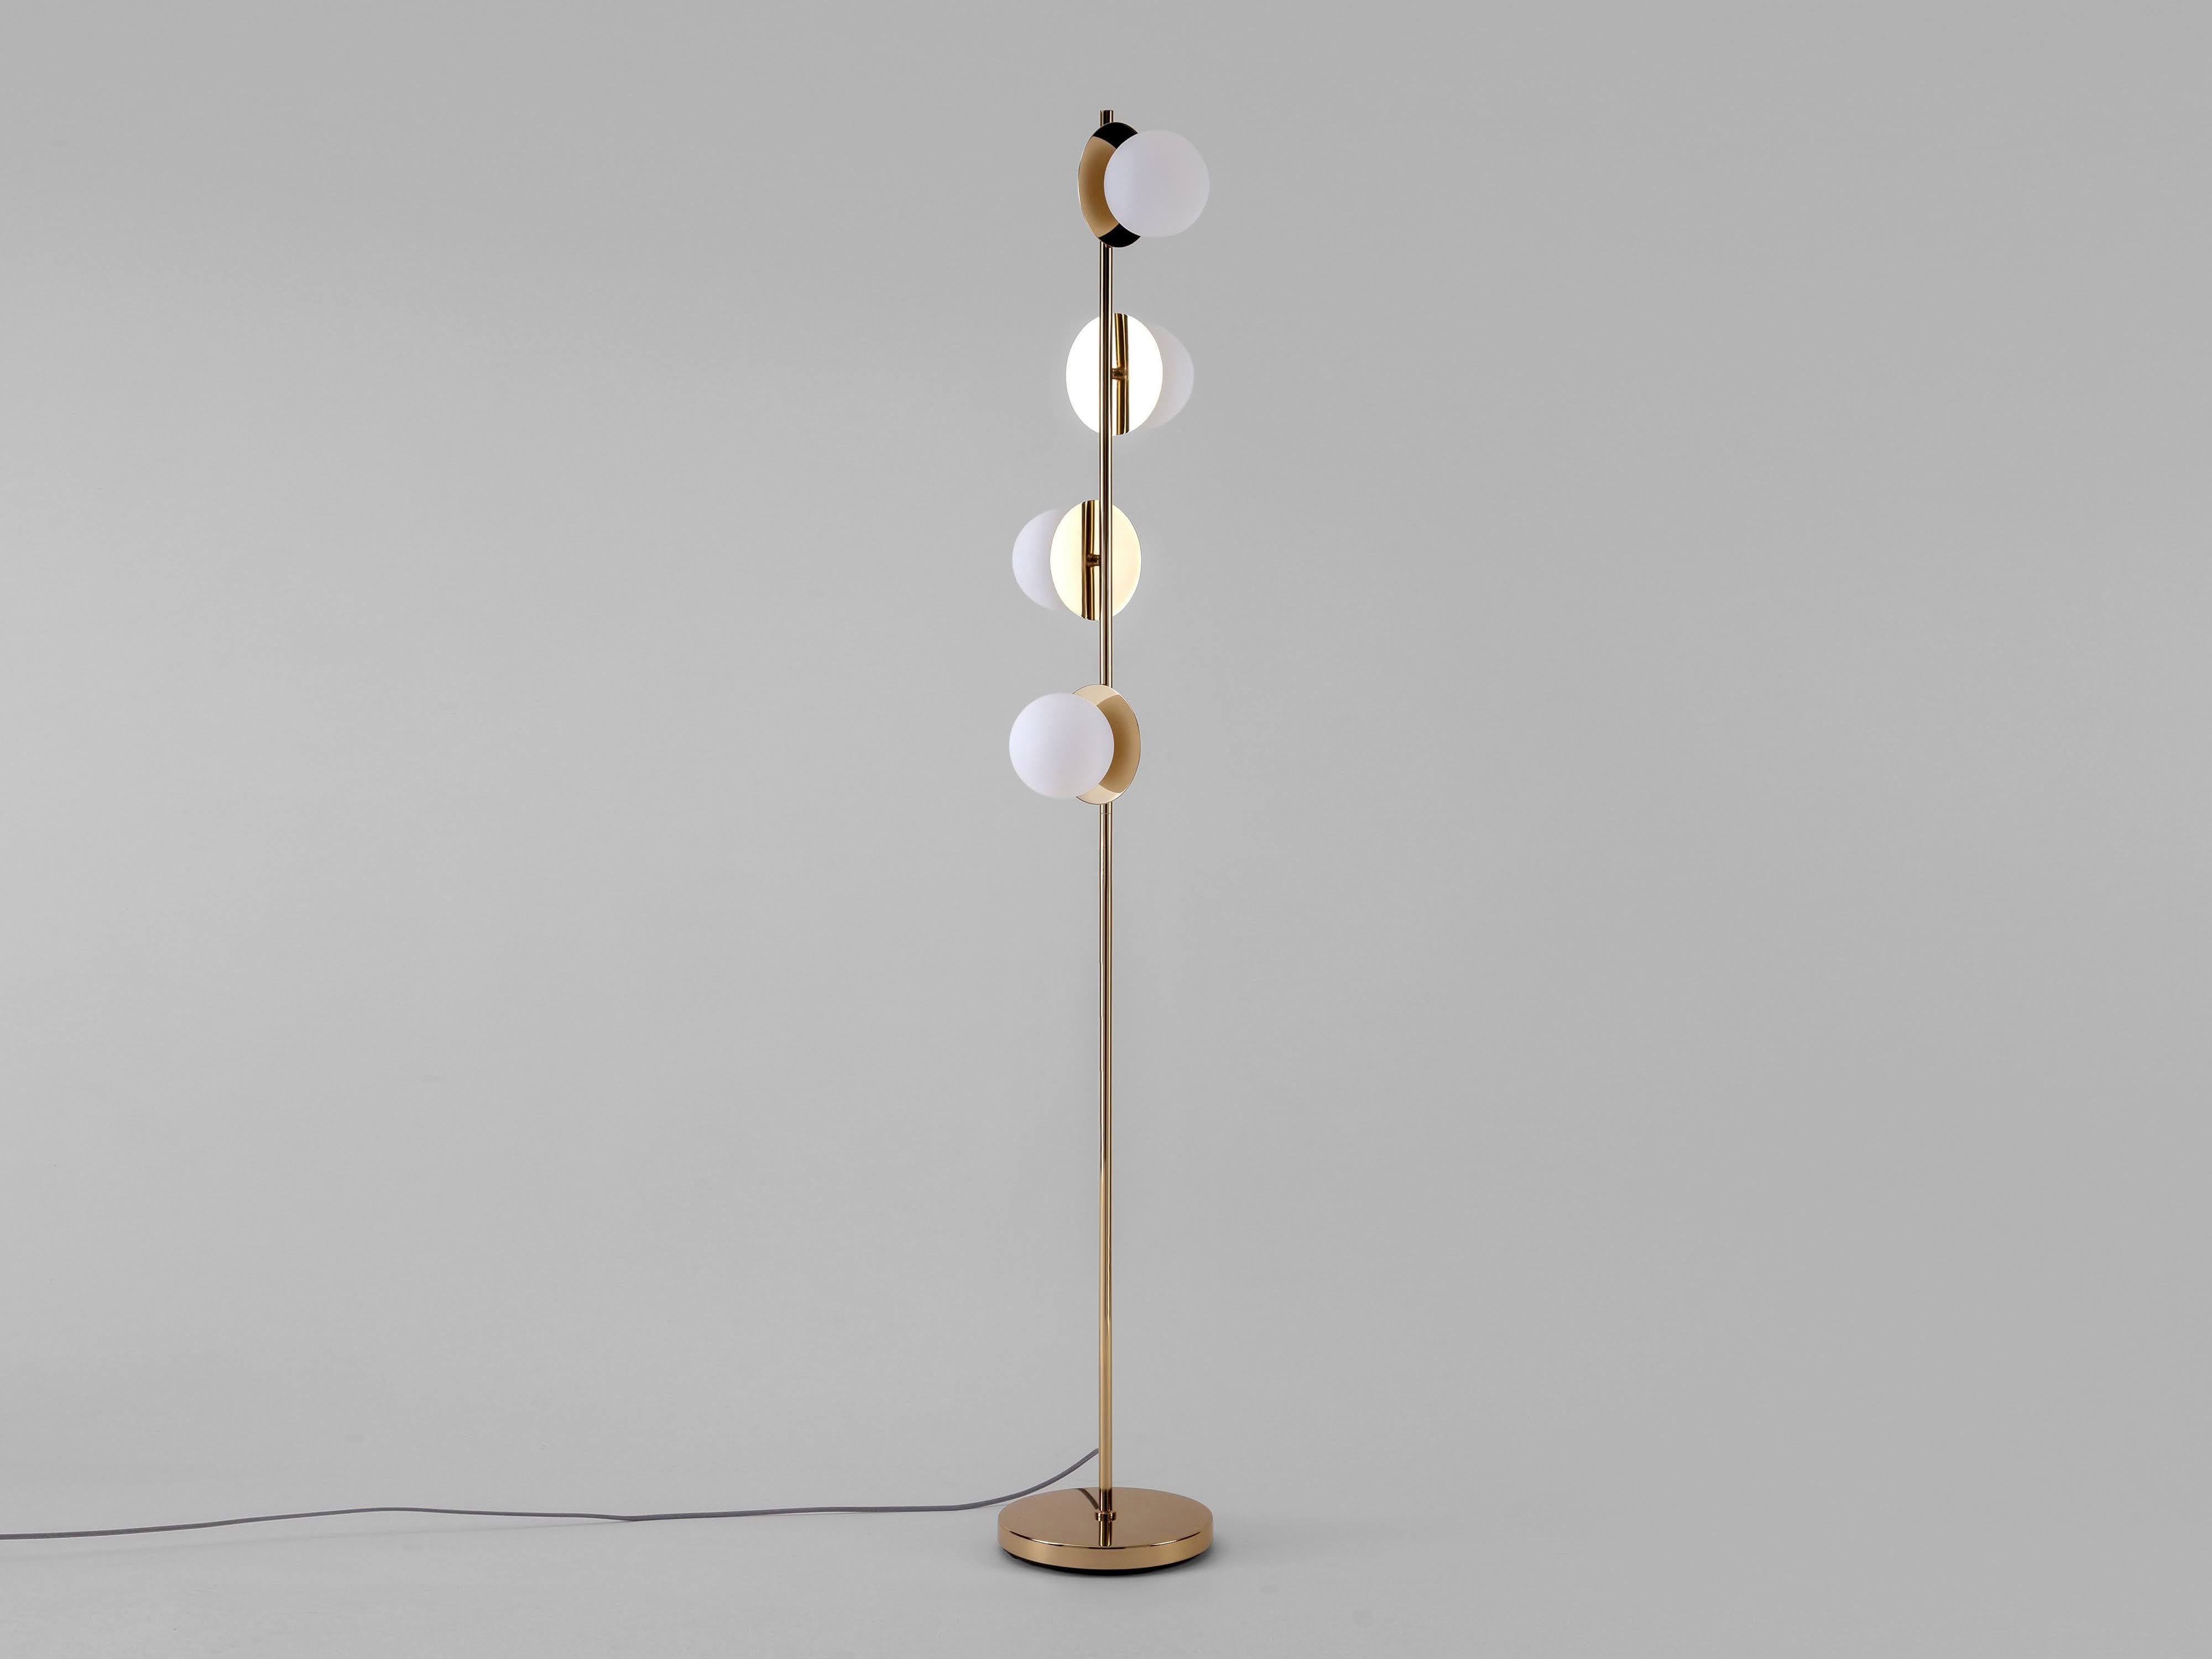 A contemporary floor lamp to transform your space. Sculptural shapes and soft light come together to create this beautiful and elegant brass standing floor lamp. Four opal shades sit on reflective brass disks, spreading a warm bright and